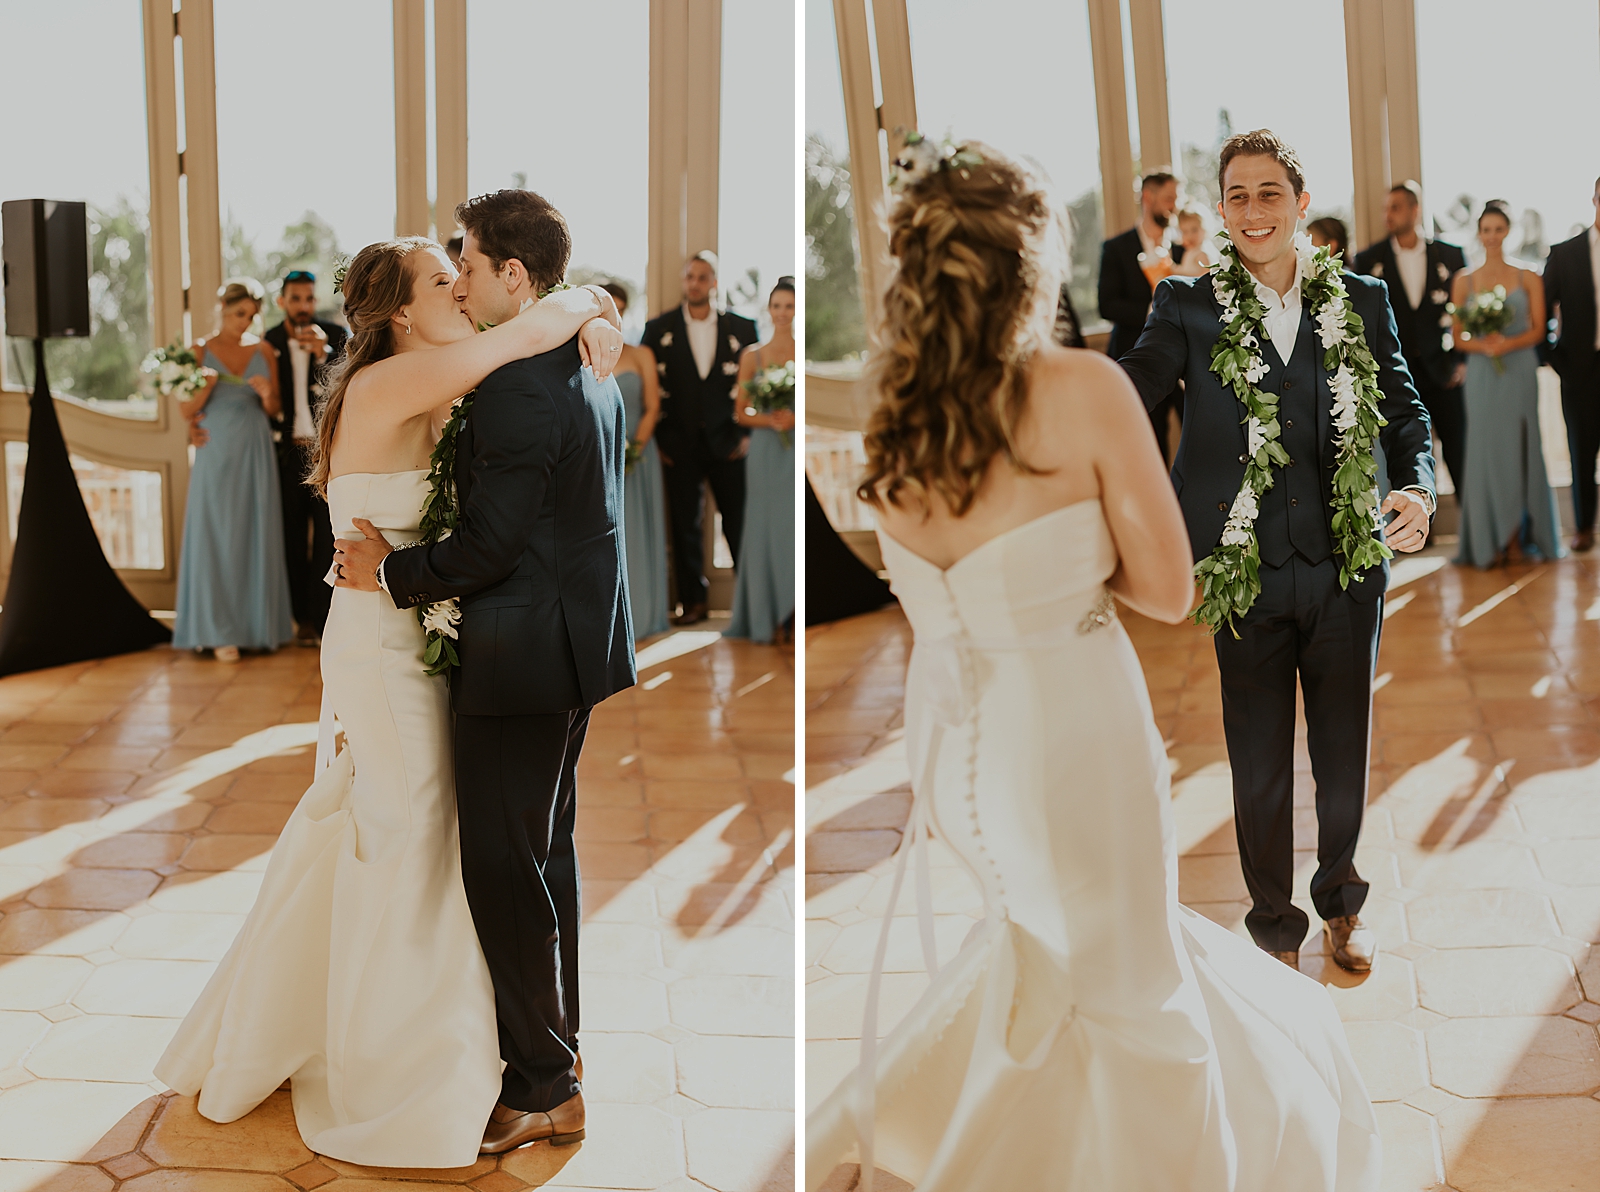 Bride and Groom kissing during First dance with guests watching